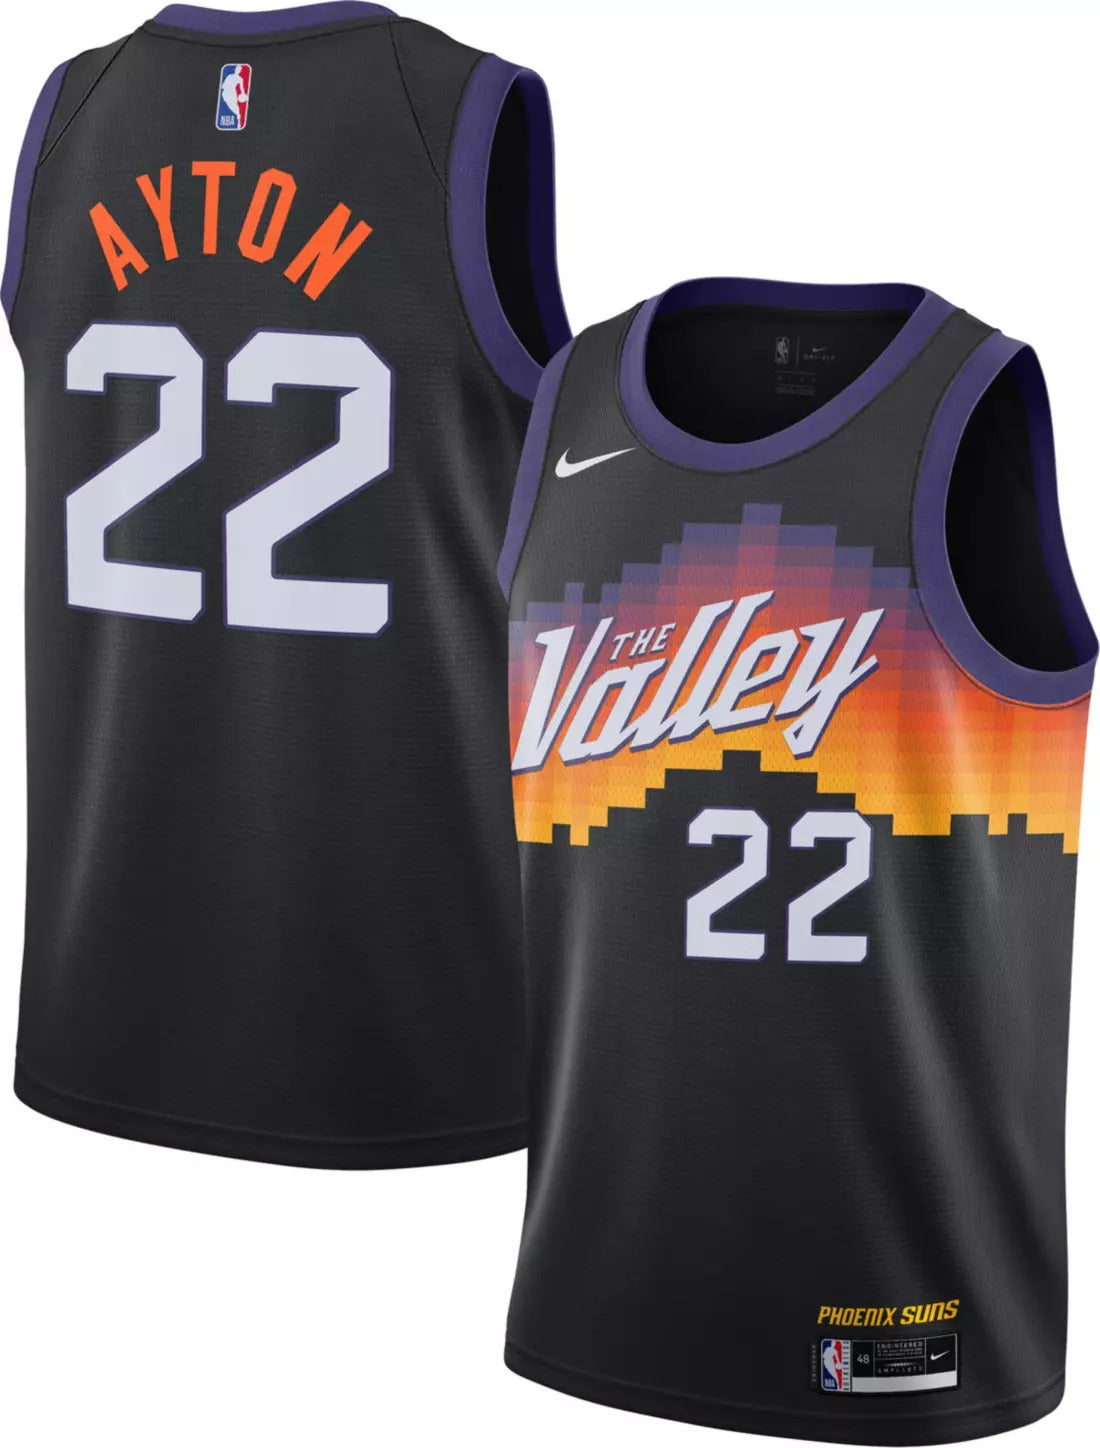 DeAndre Ayton 2021 "The Valley" City Edition